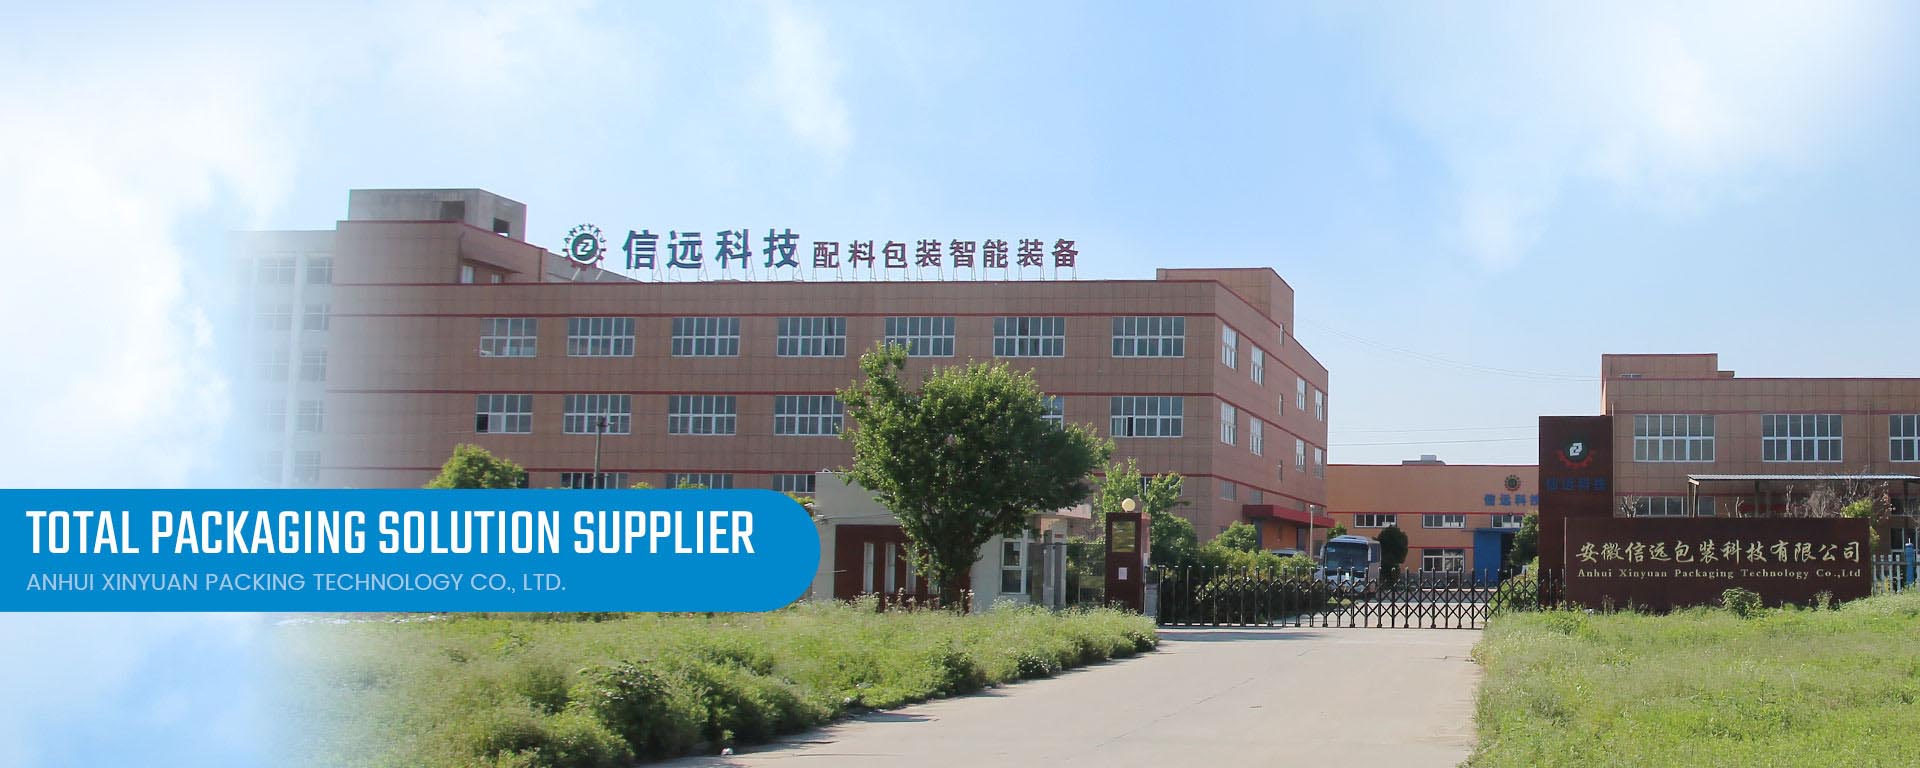 Xinyuan Packing Company